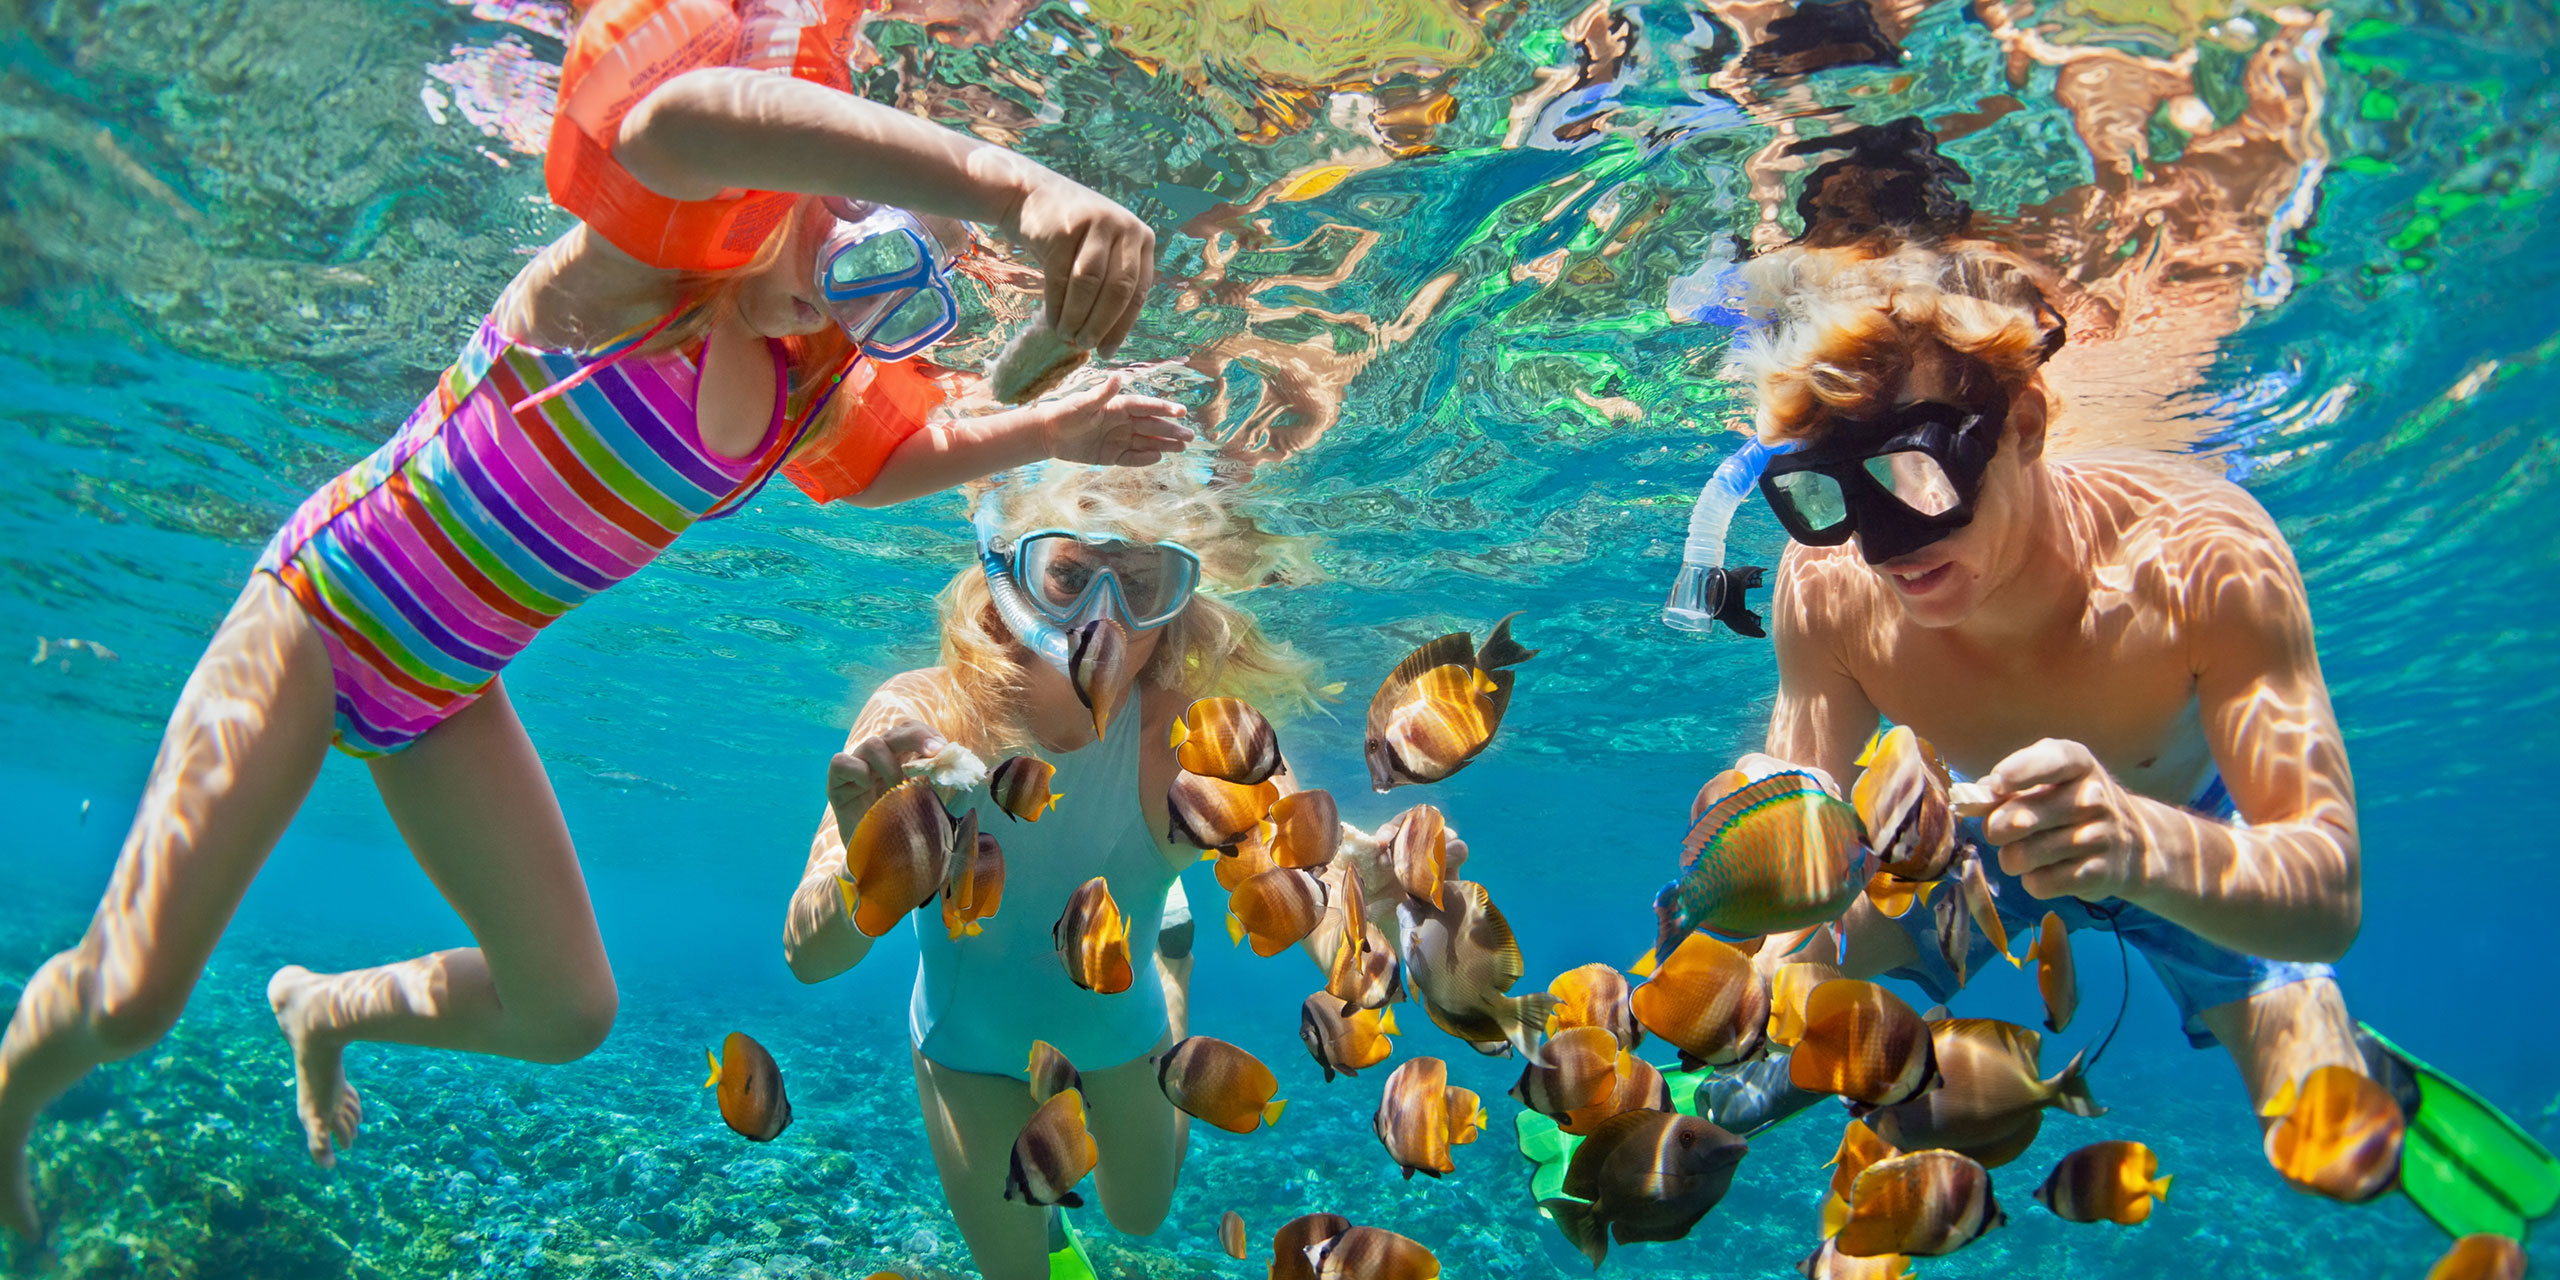 Family Snorkeling with Fish; Courtesy of Tropical Studio/Shutterstock.com